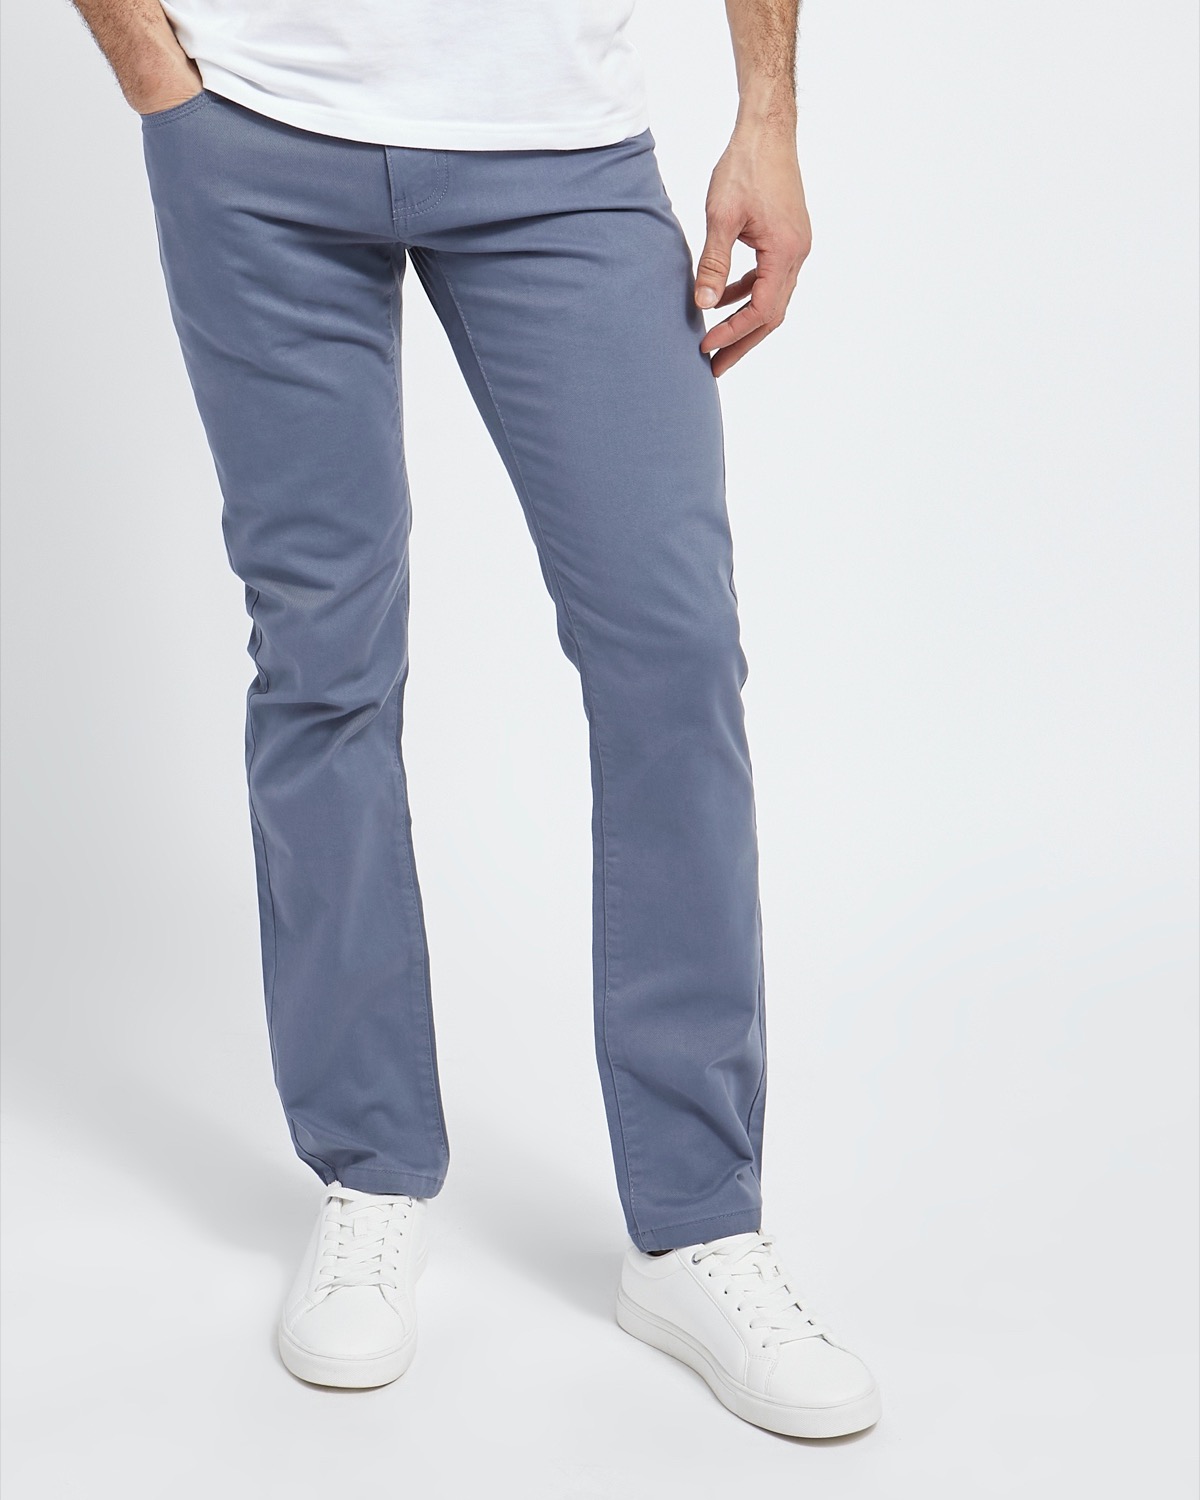 Slim Fit Lycra Twill Trousers: The Ultimate Blend of Style and Comfort